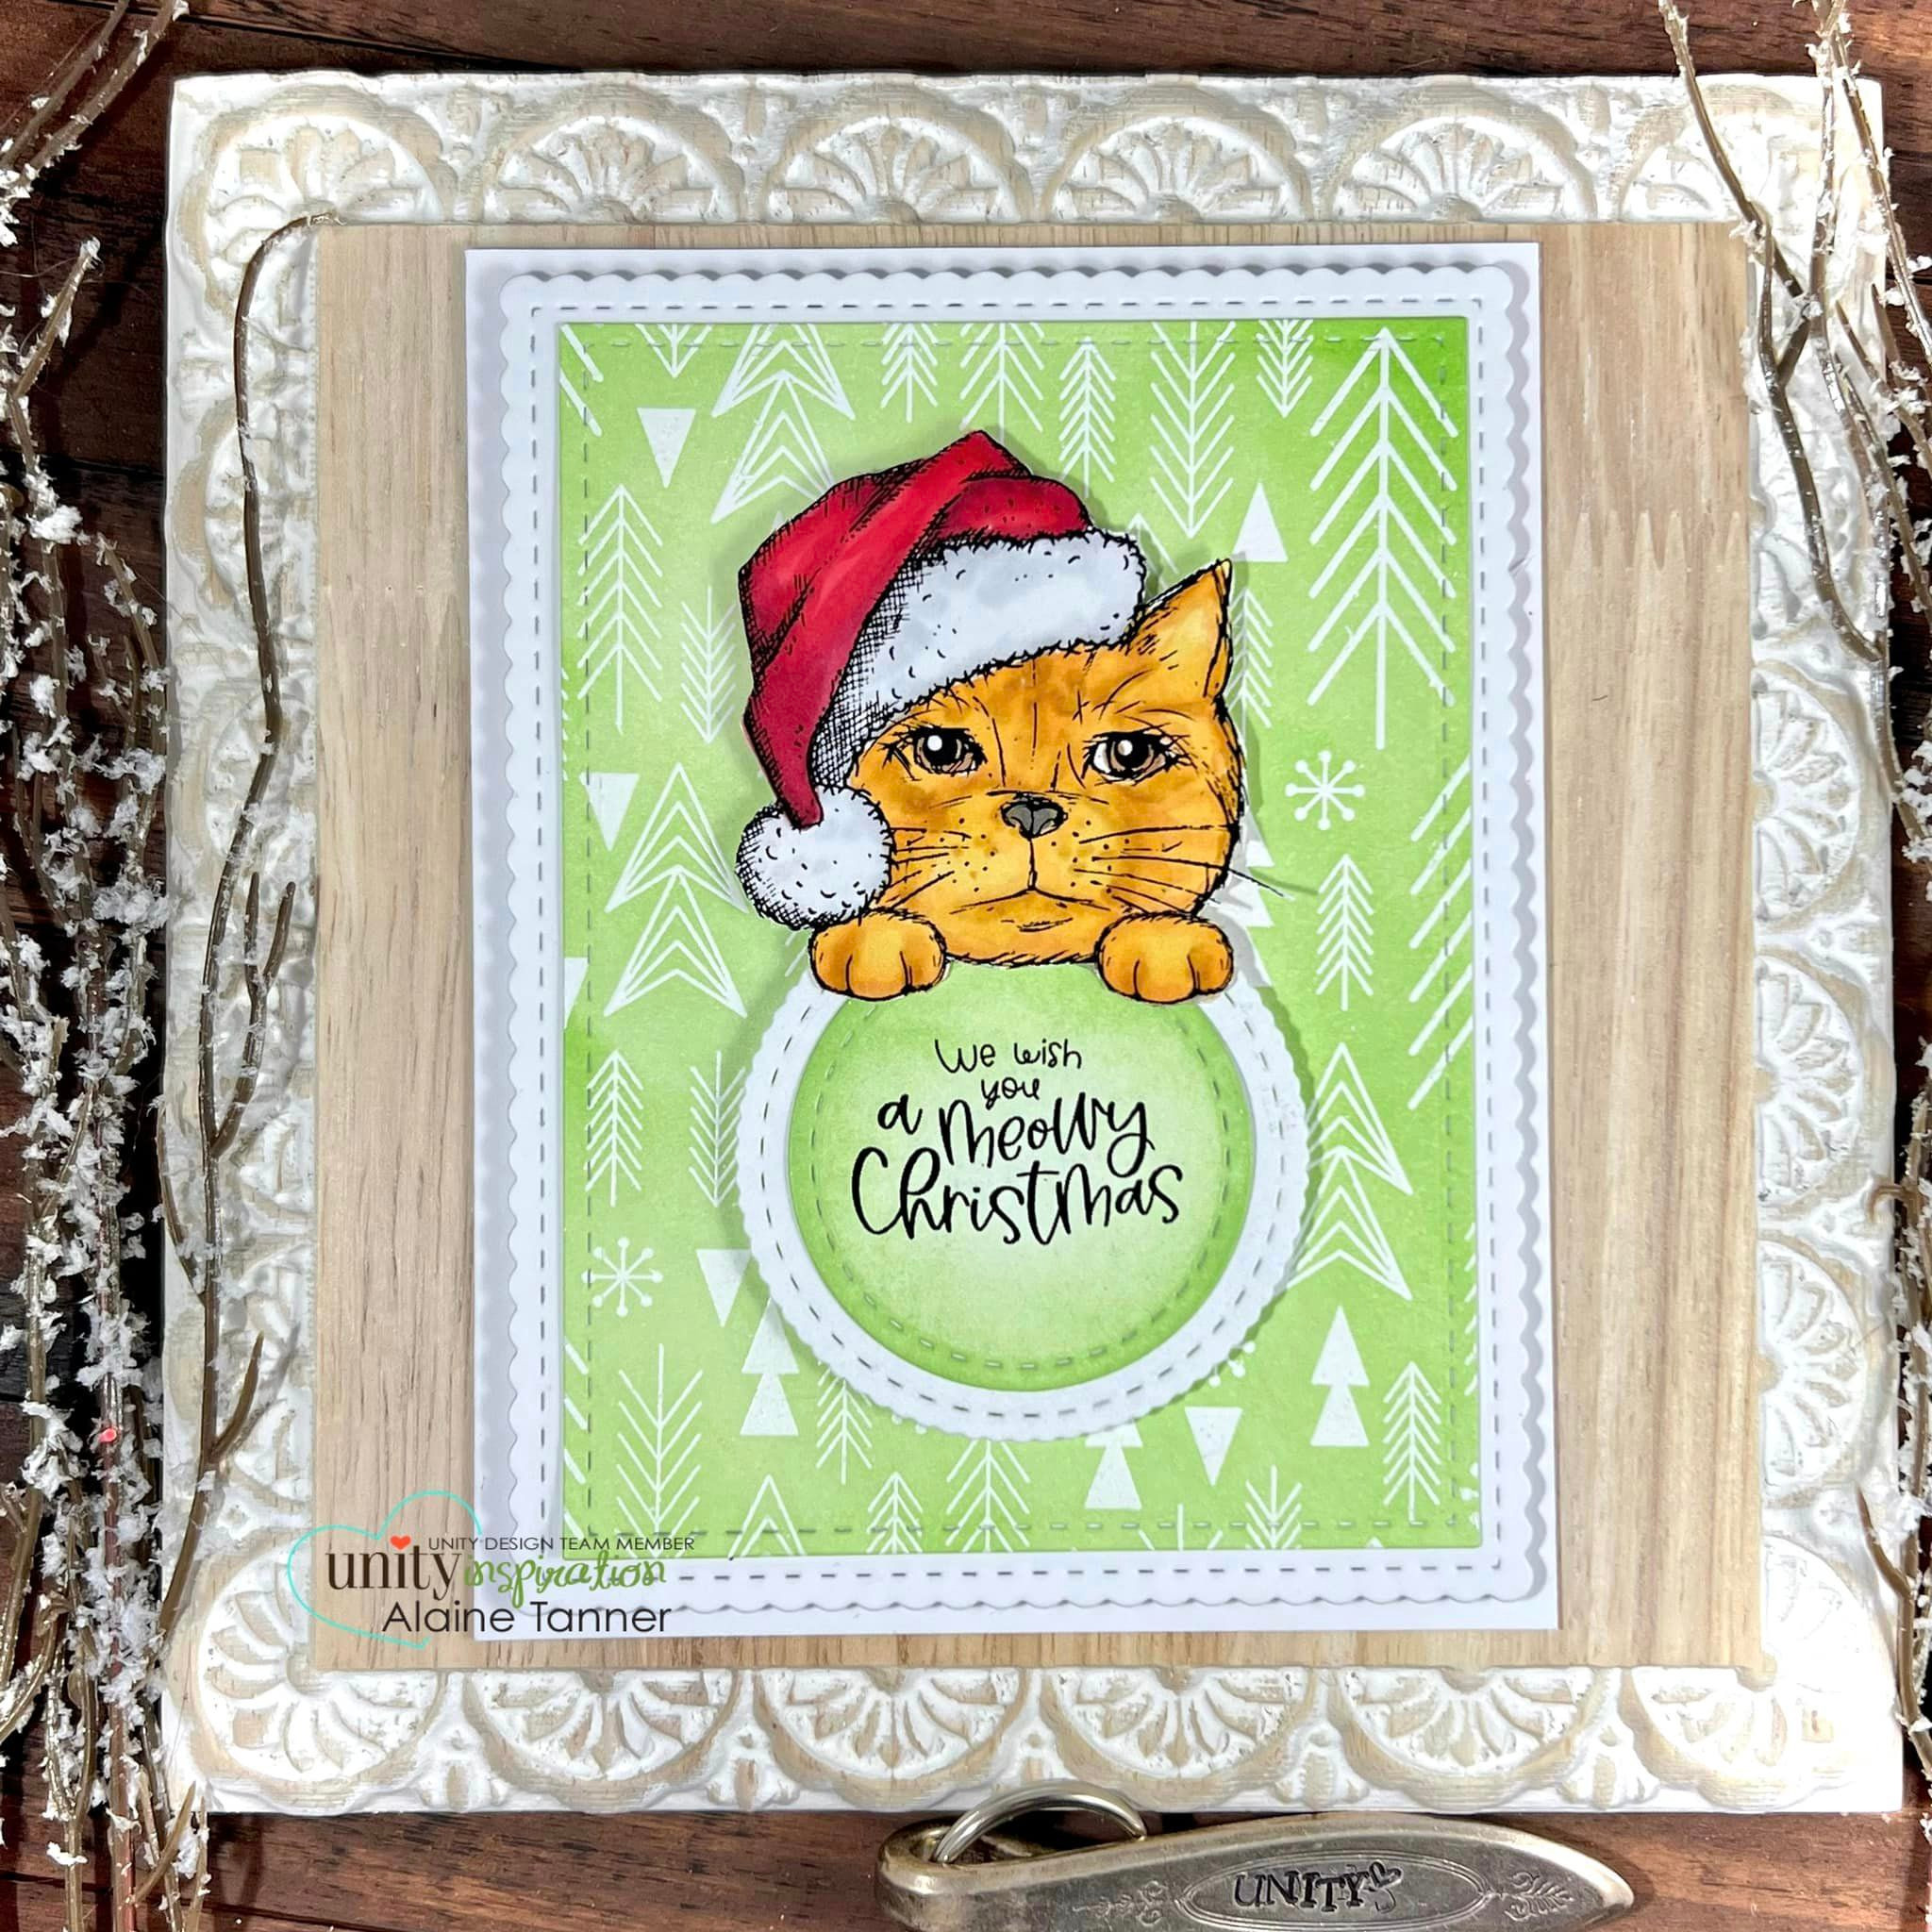 Cat's Meow - Unity Stamp Company